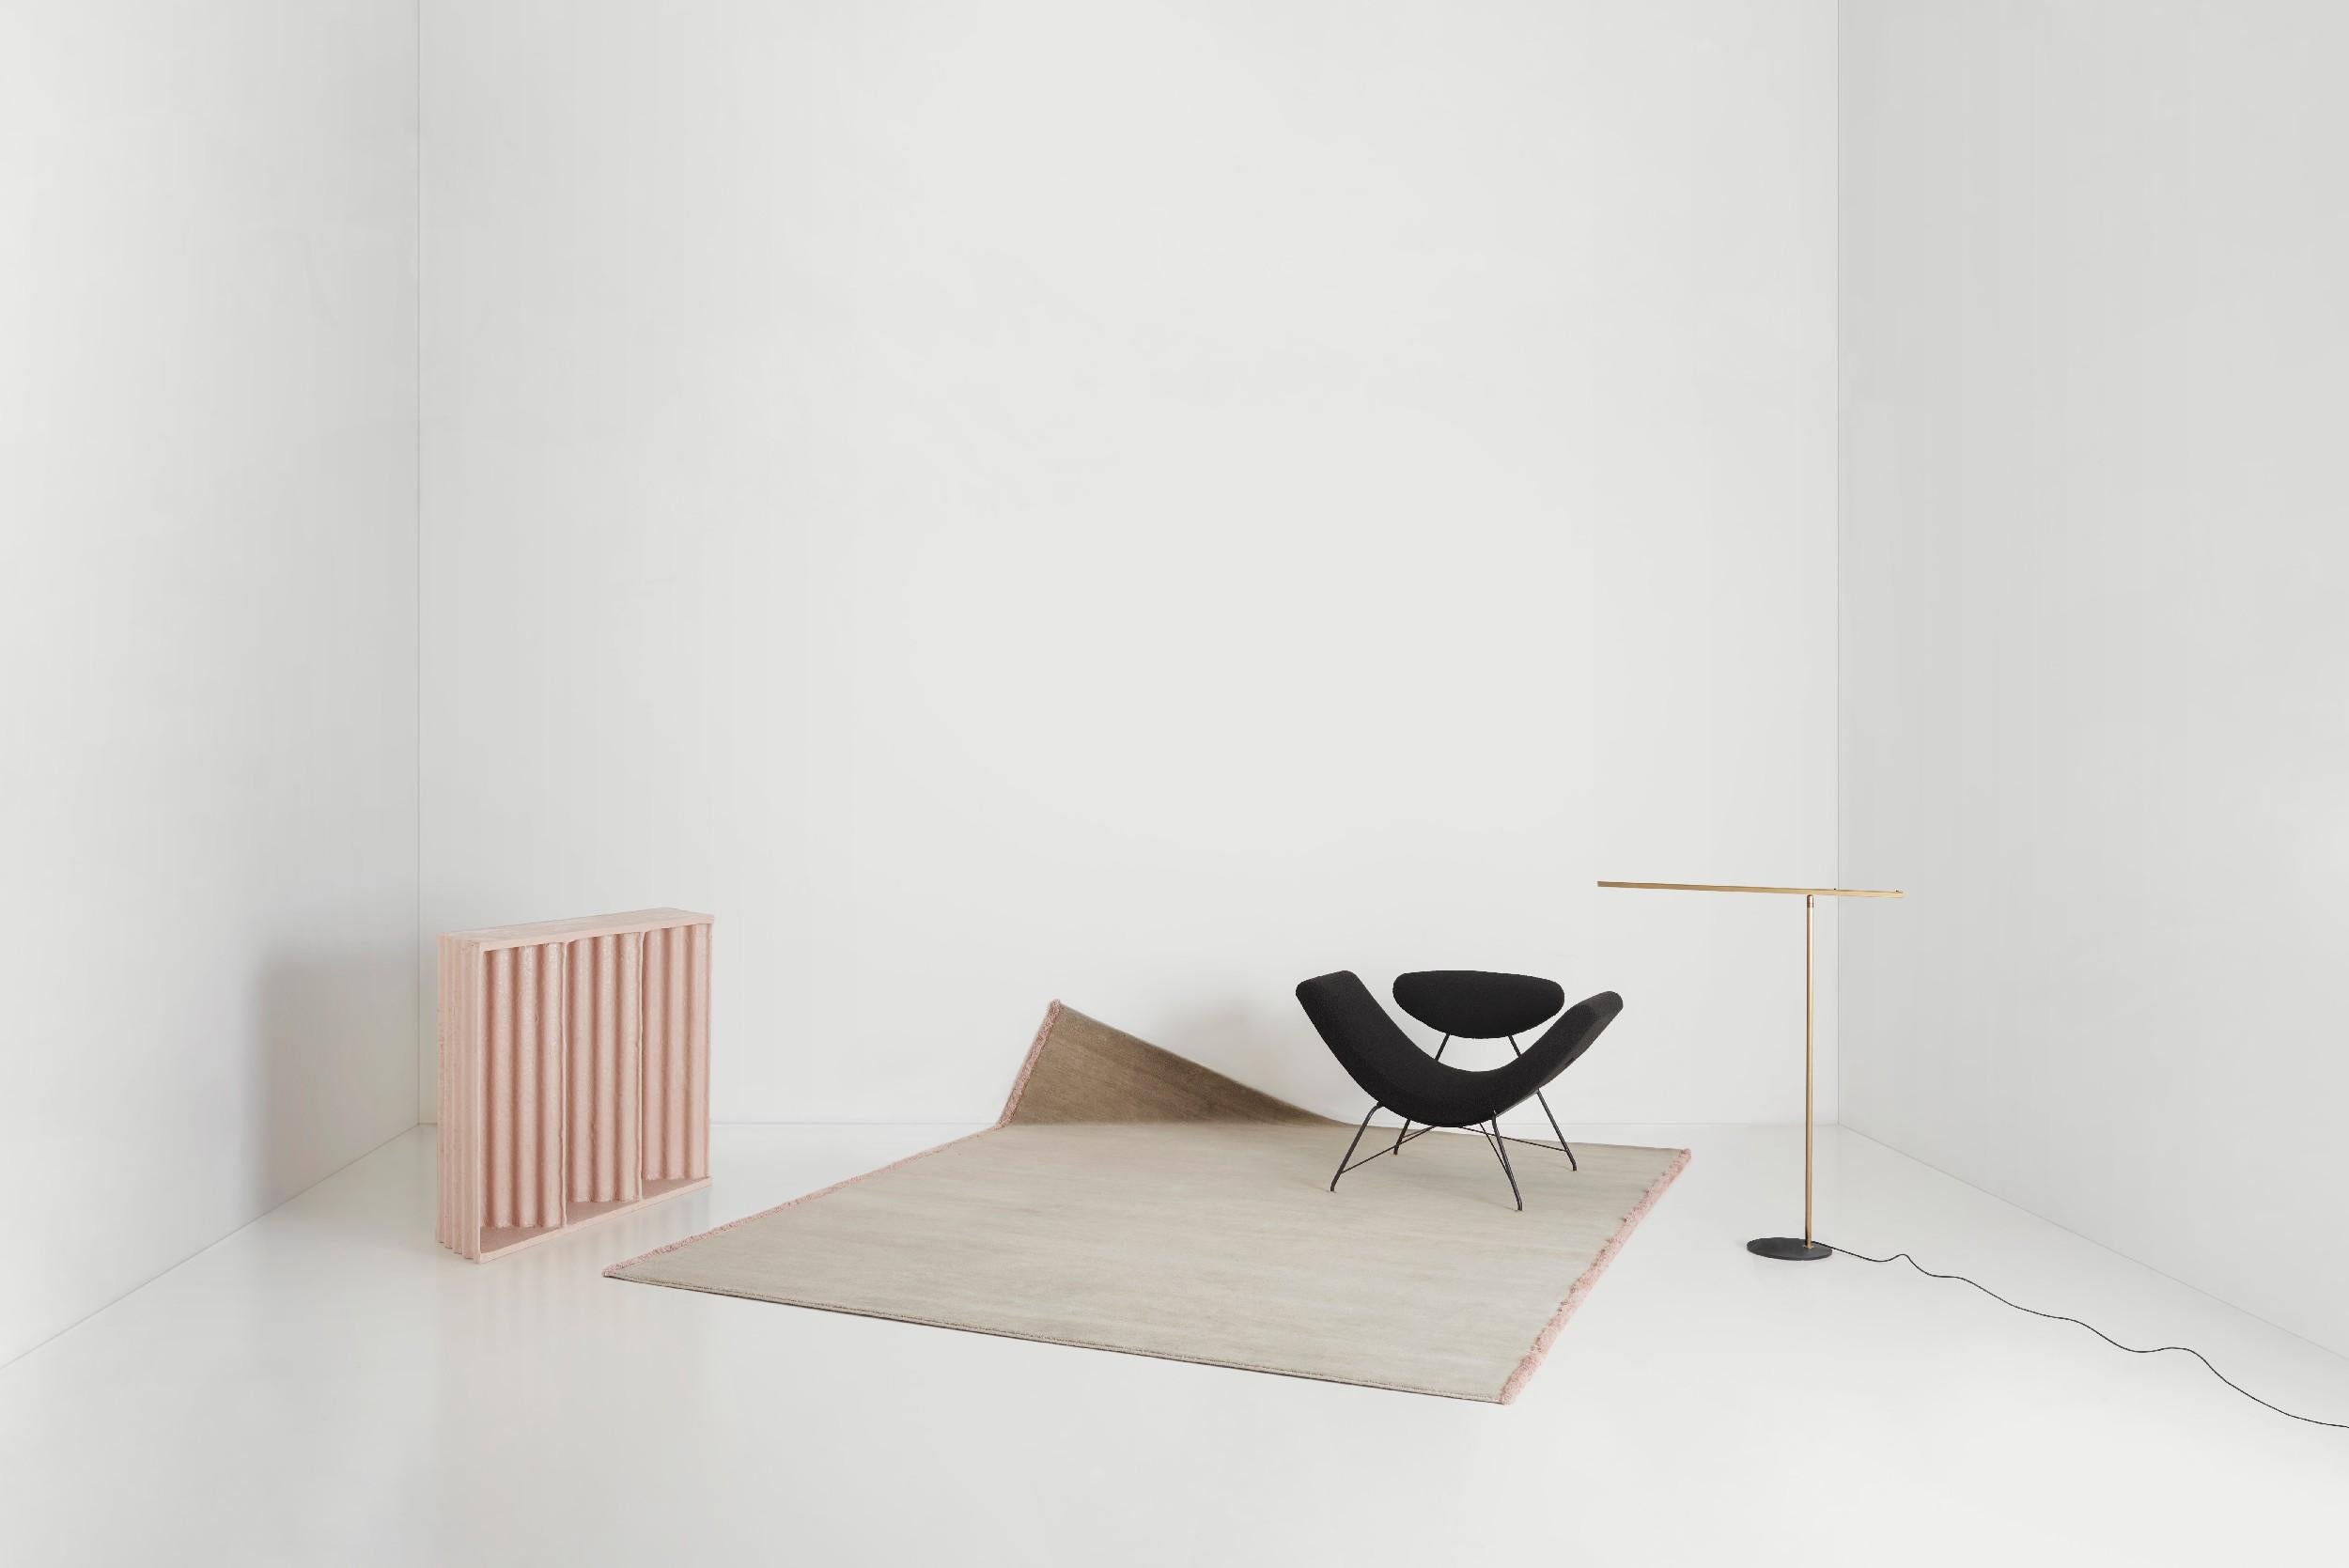 The Ondulato Fiberglass Console explores corrugated sheet material where the territory in which the item is made dictates the finish. The Console is part of a larger collection developed during an artist residency. Corrugated sheets, a beautifully